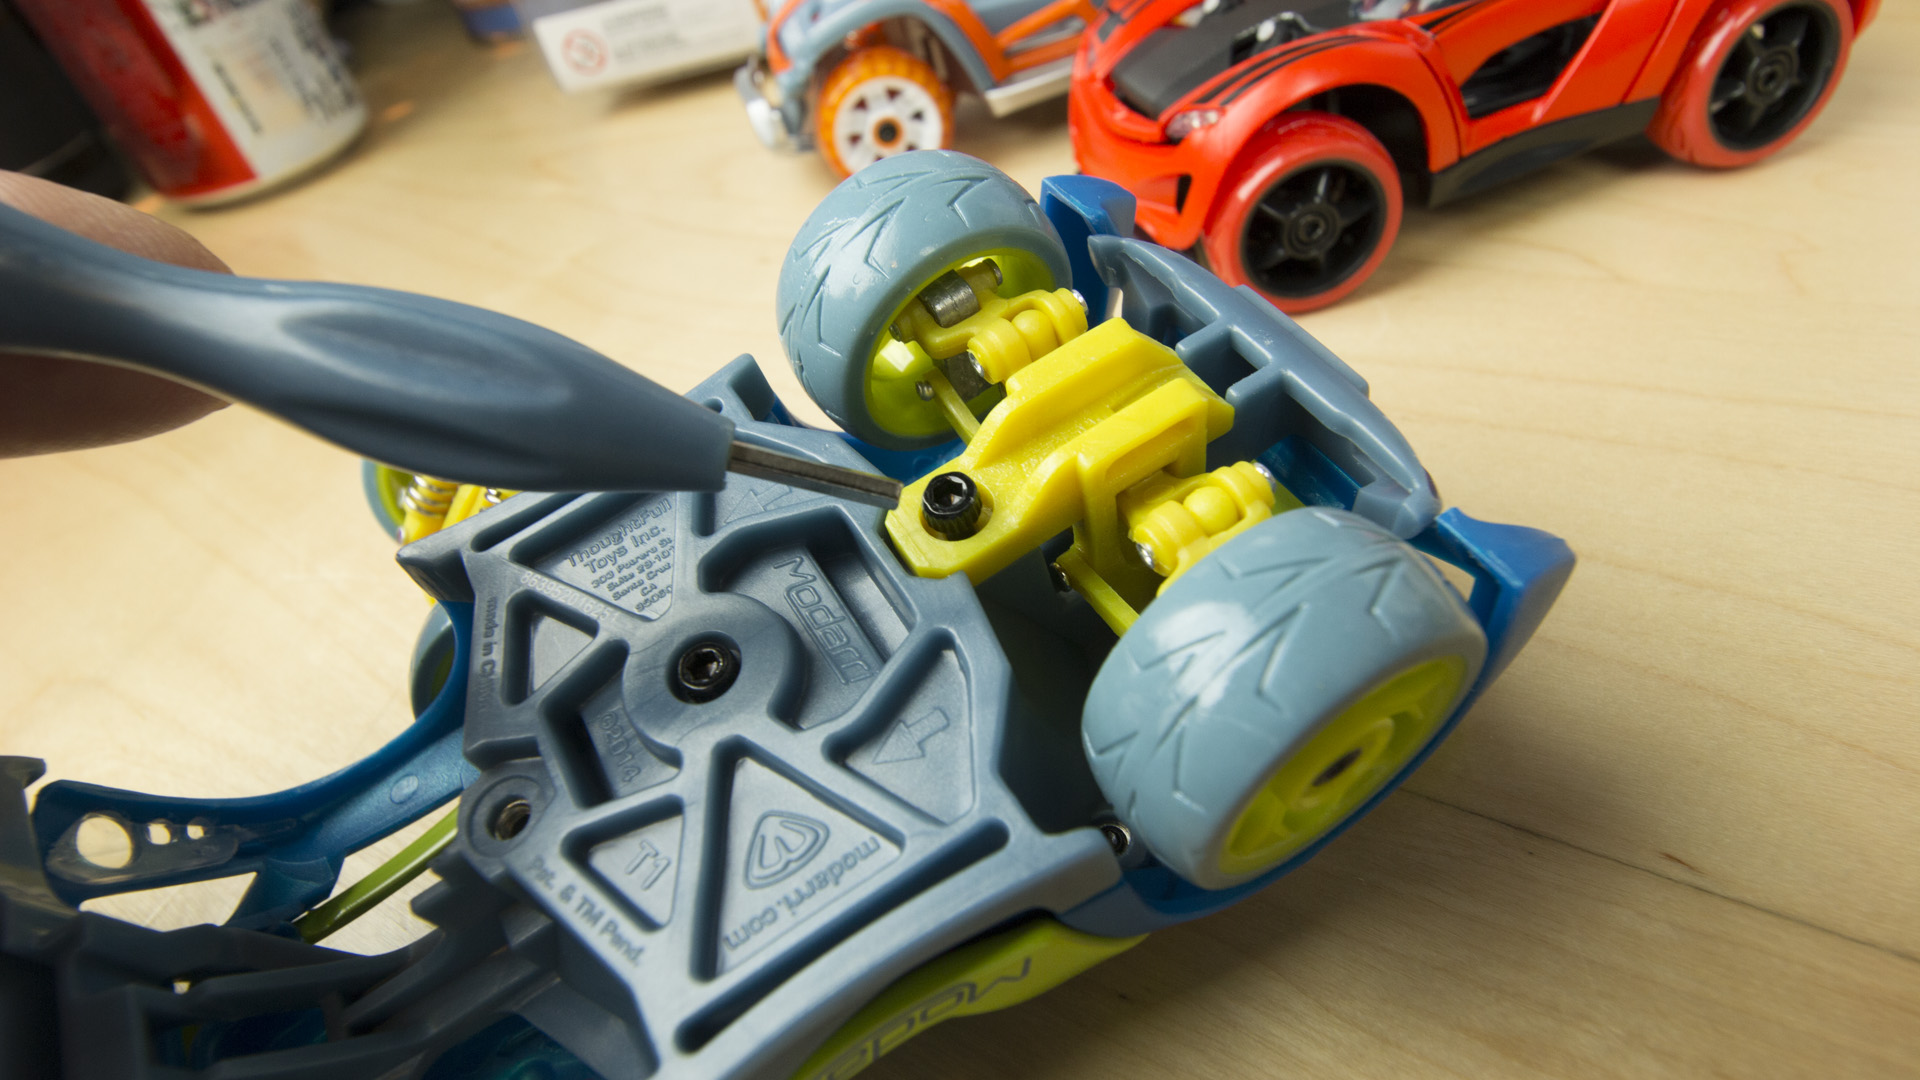 The Coolest Toy Cars Are The Ones You Build Yourself